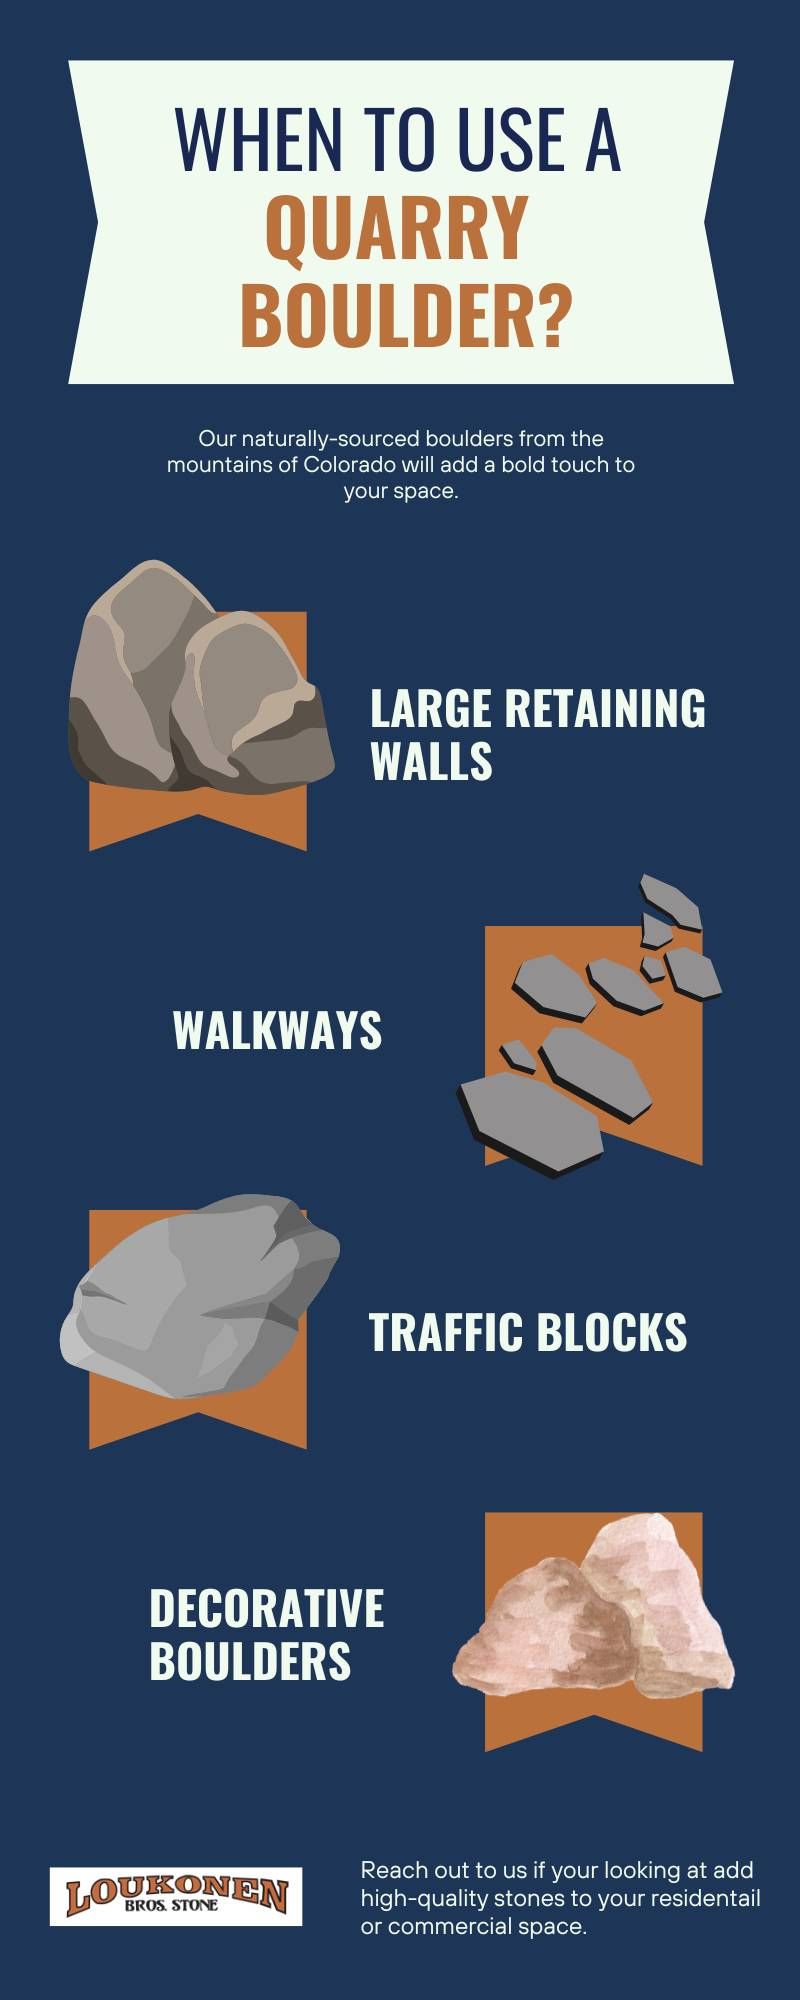 When To Use A Quarry Boulder.jpg